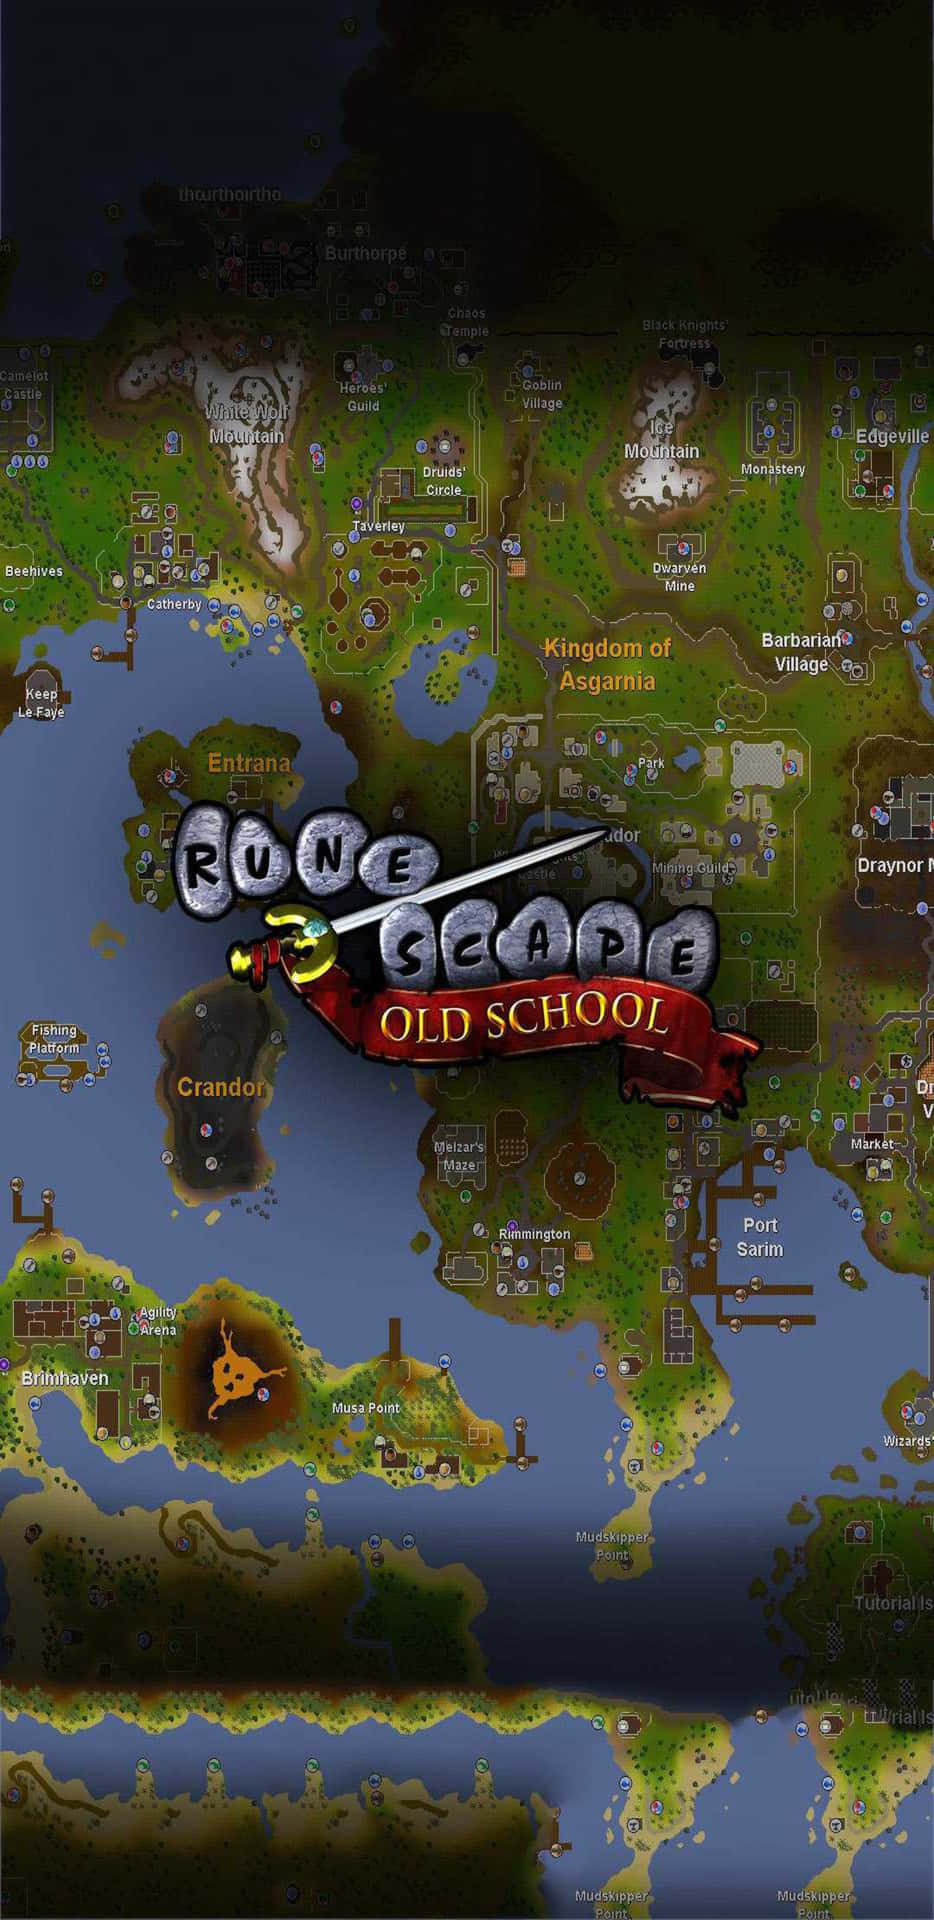 A dynamic perspective of the epic realm of Gielinor, as displayed on a Pixel 3xl screen, with a focus on Old School Runescape gaming environment.